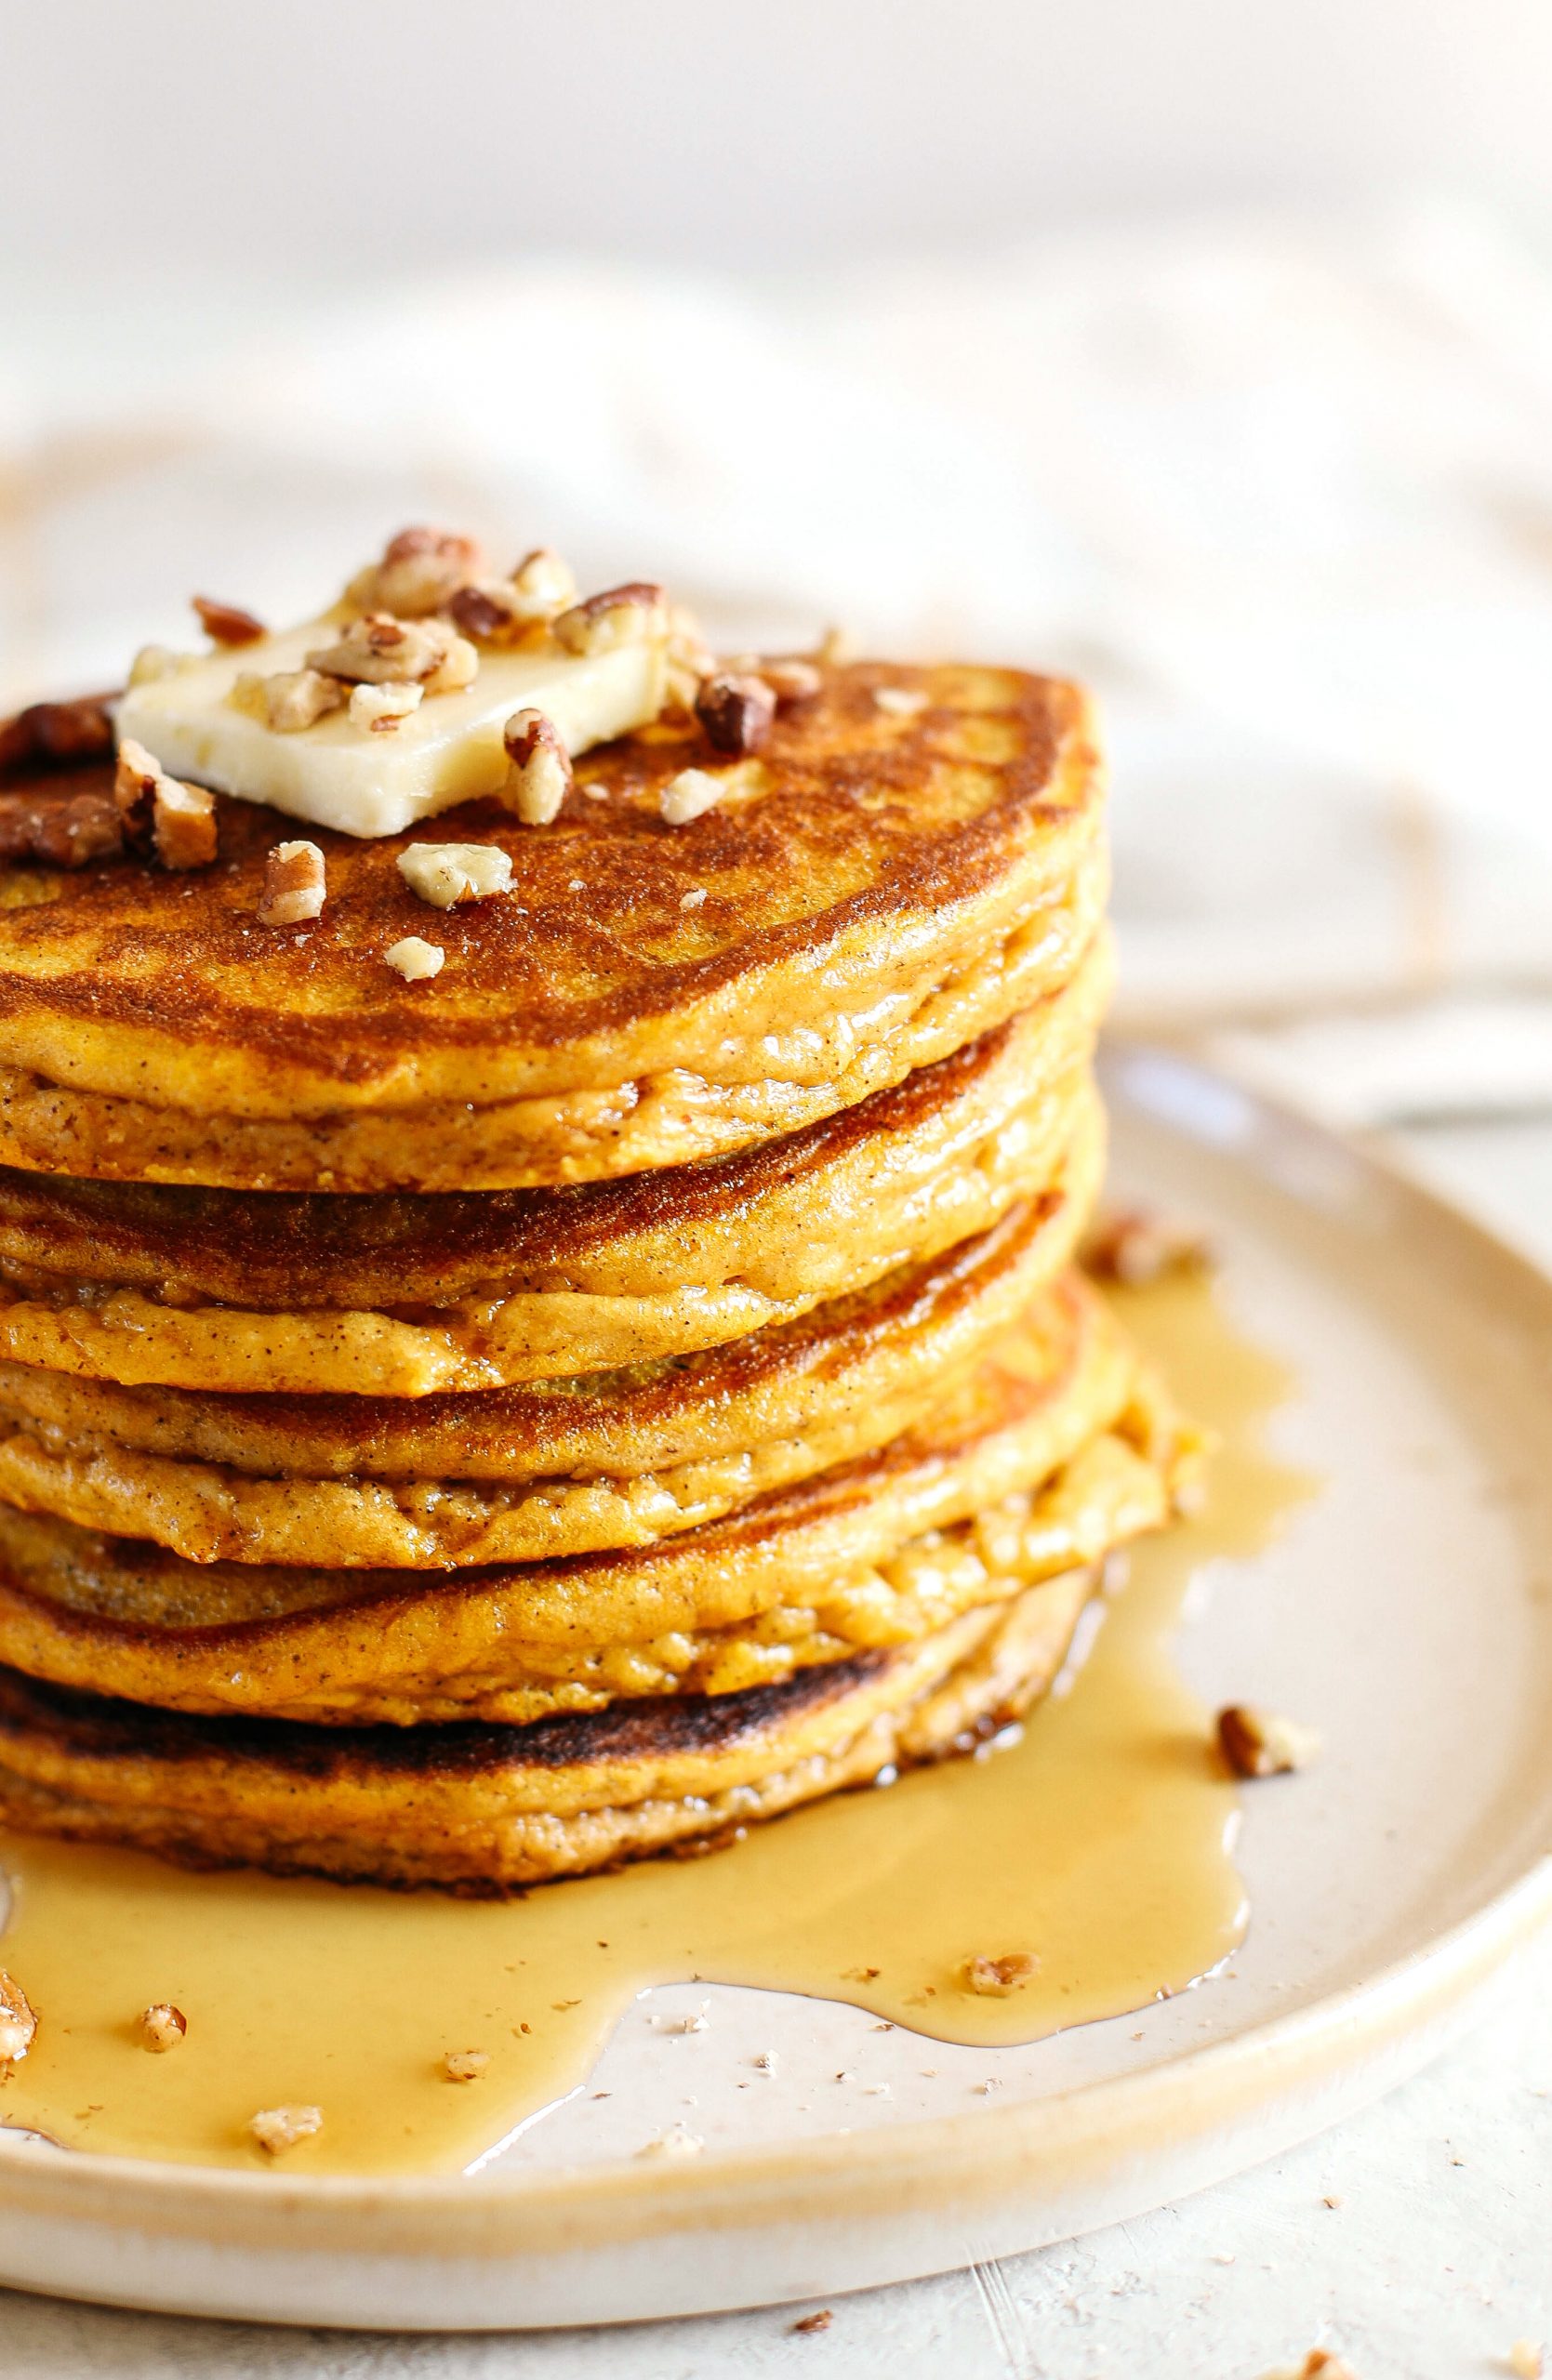 Start your morning with these fluffy pumpkin pancakes that are gluten-free, dairy-free and paleo with zero refined sugars made with almond flour for an easy delicious fall breakfast!